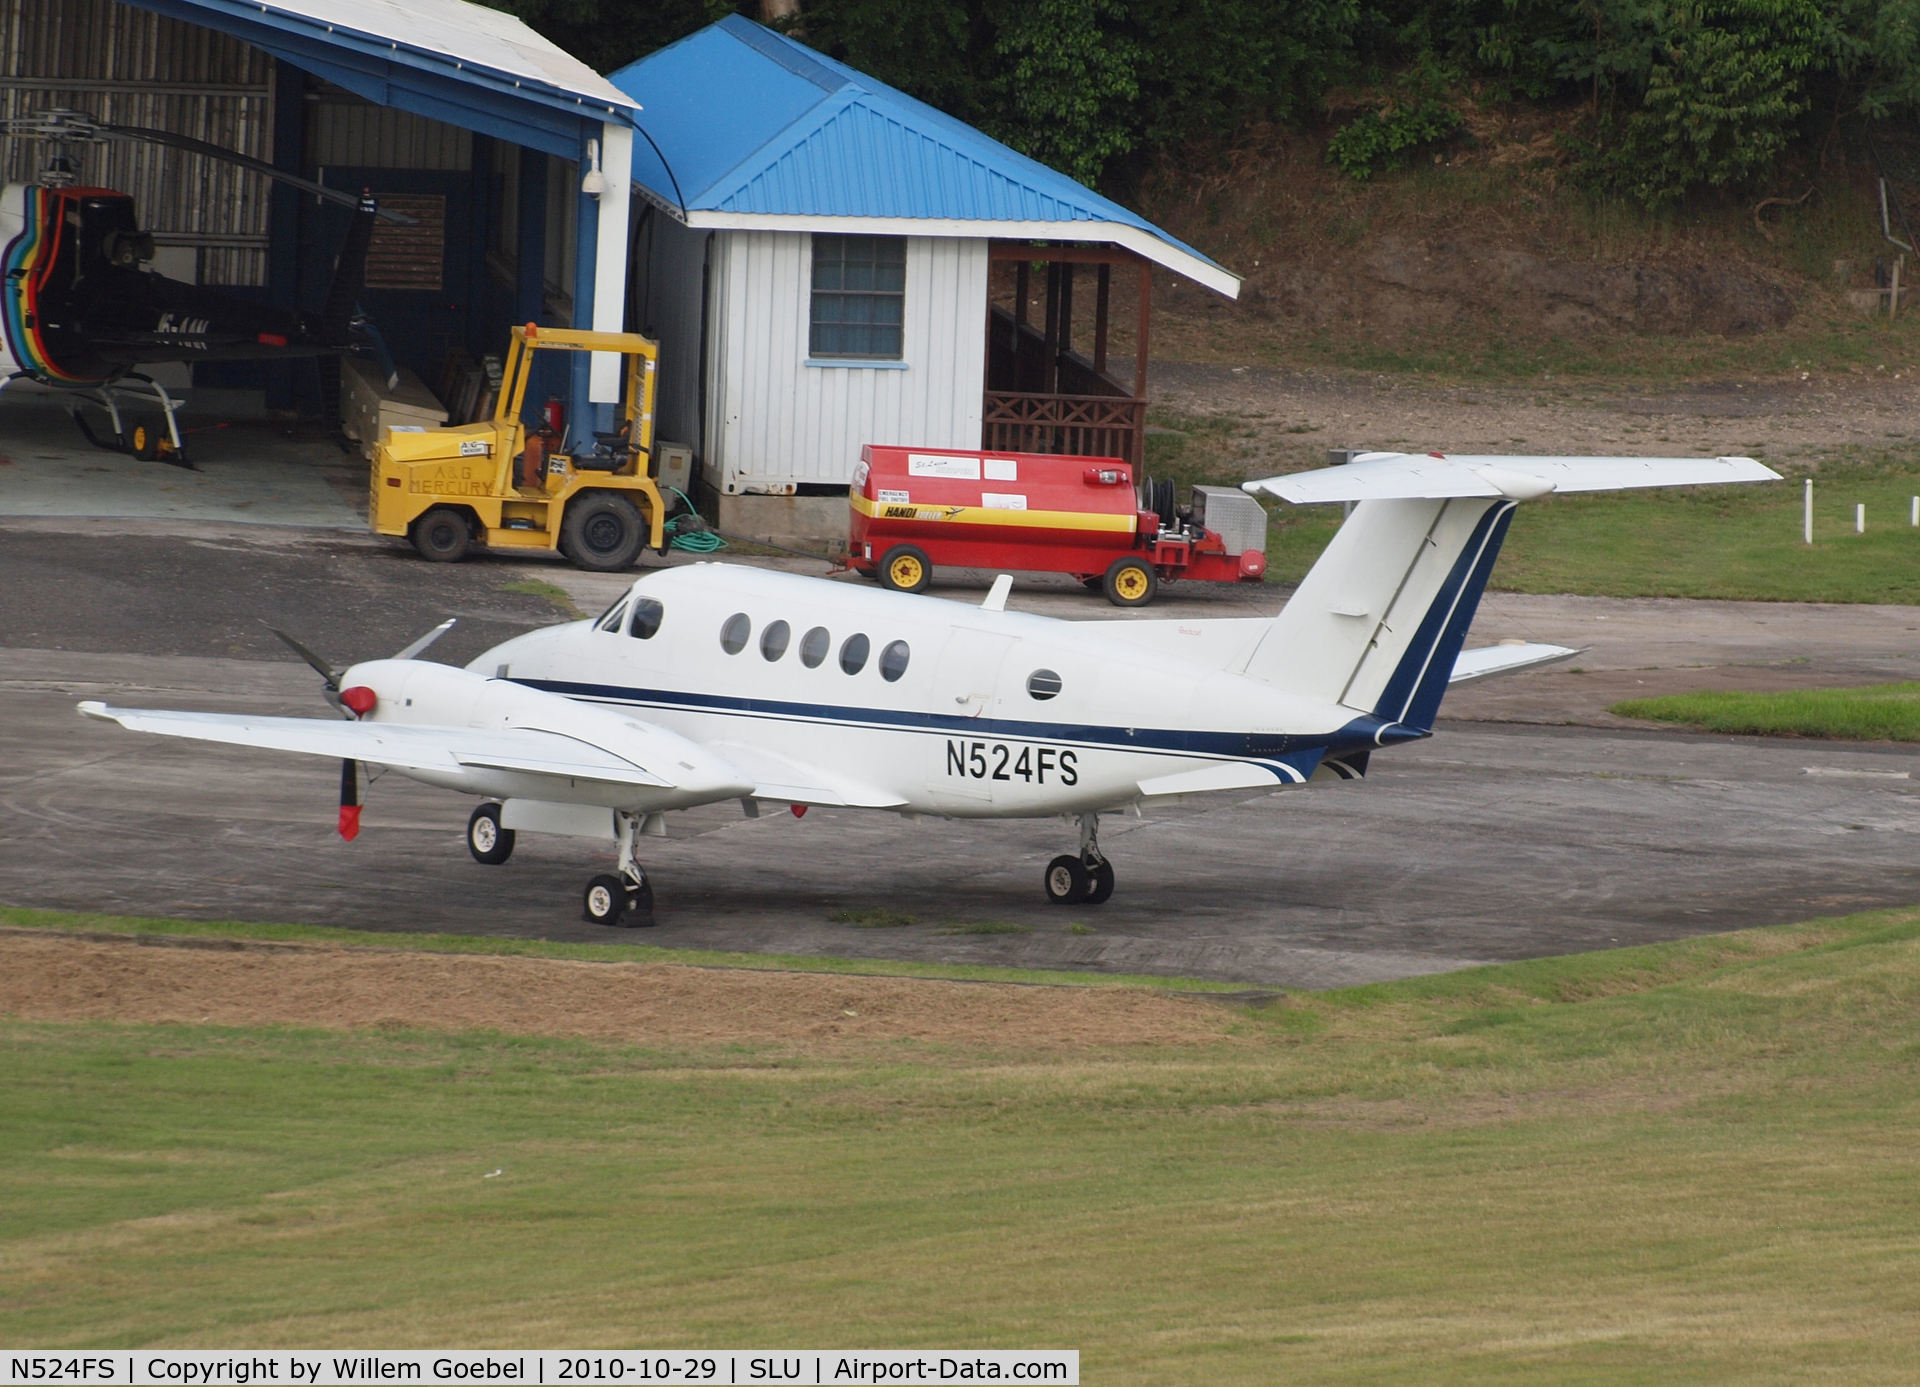 N524FS, 1979 Beech 200 King Air C/N BB-590, Parking on airstrip from Castries on st Lucia.